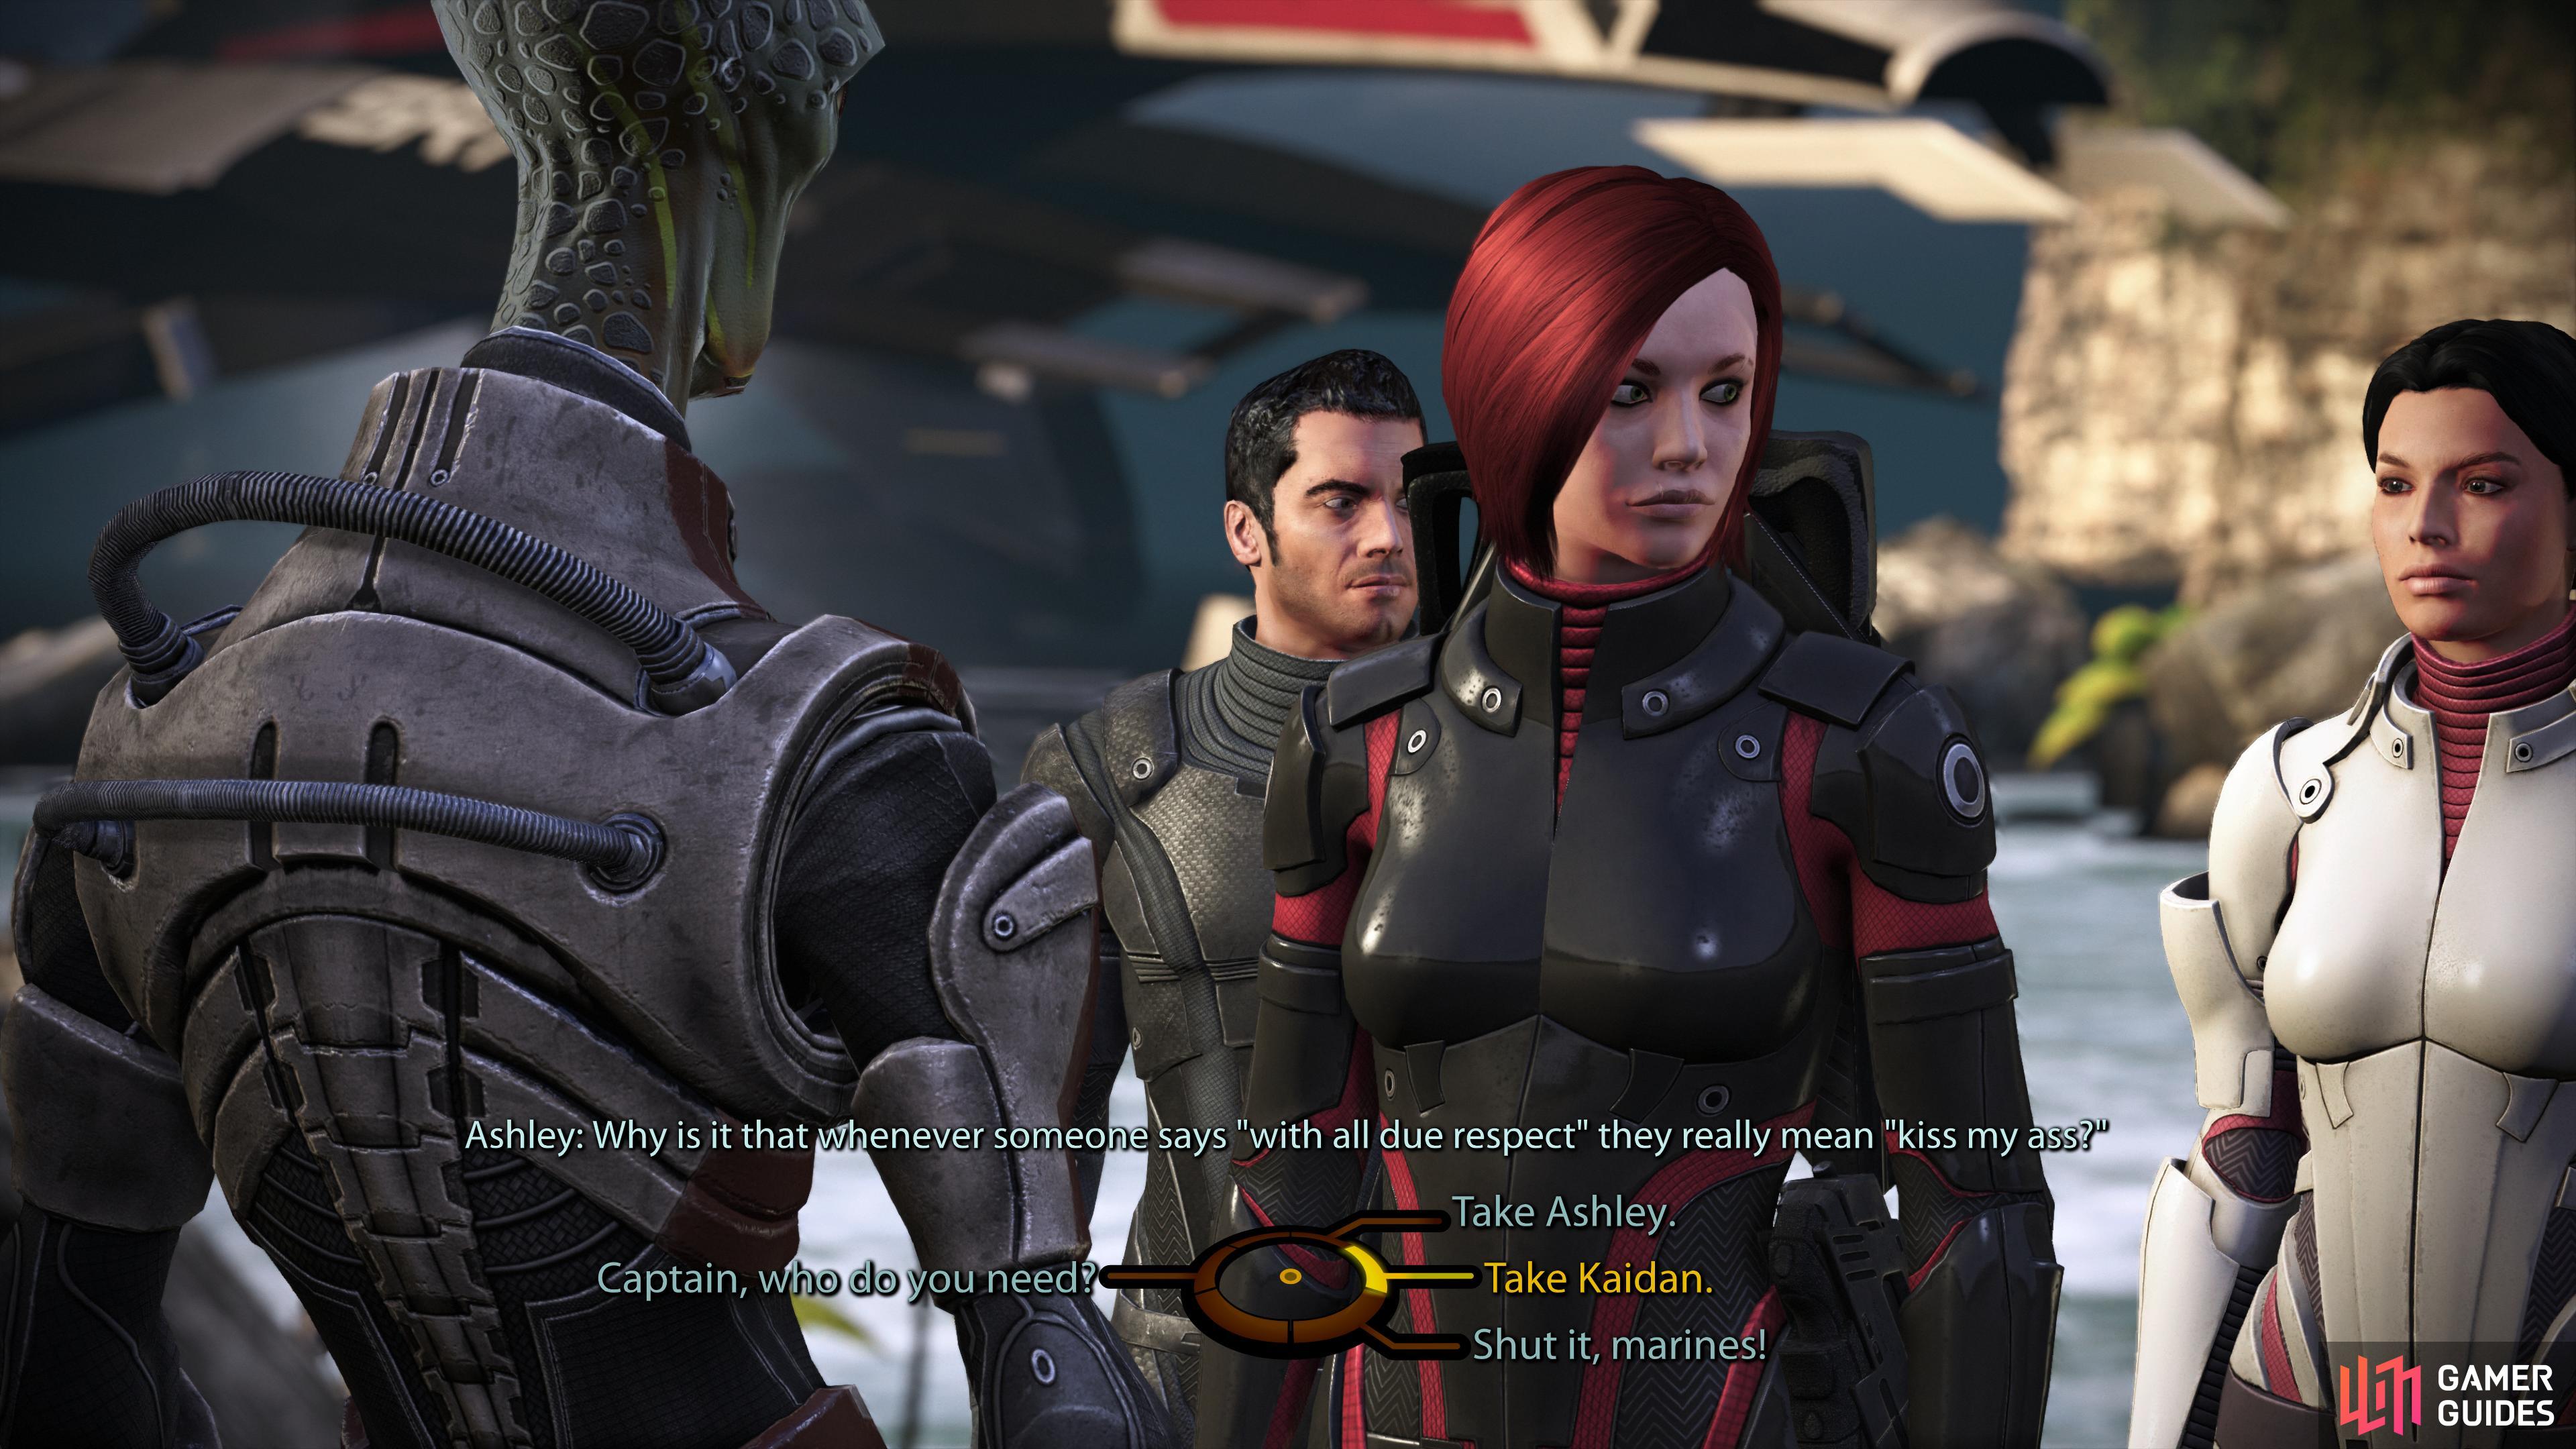 After dealing with Wrex, you'll have to send either Ashley or Kaiden with Captain Kirrahe.